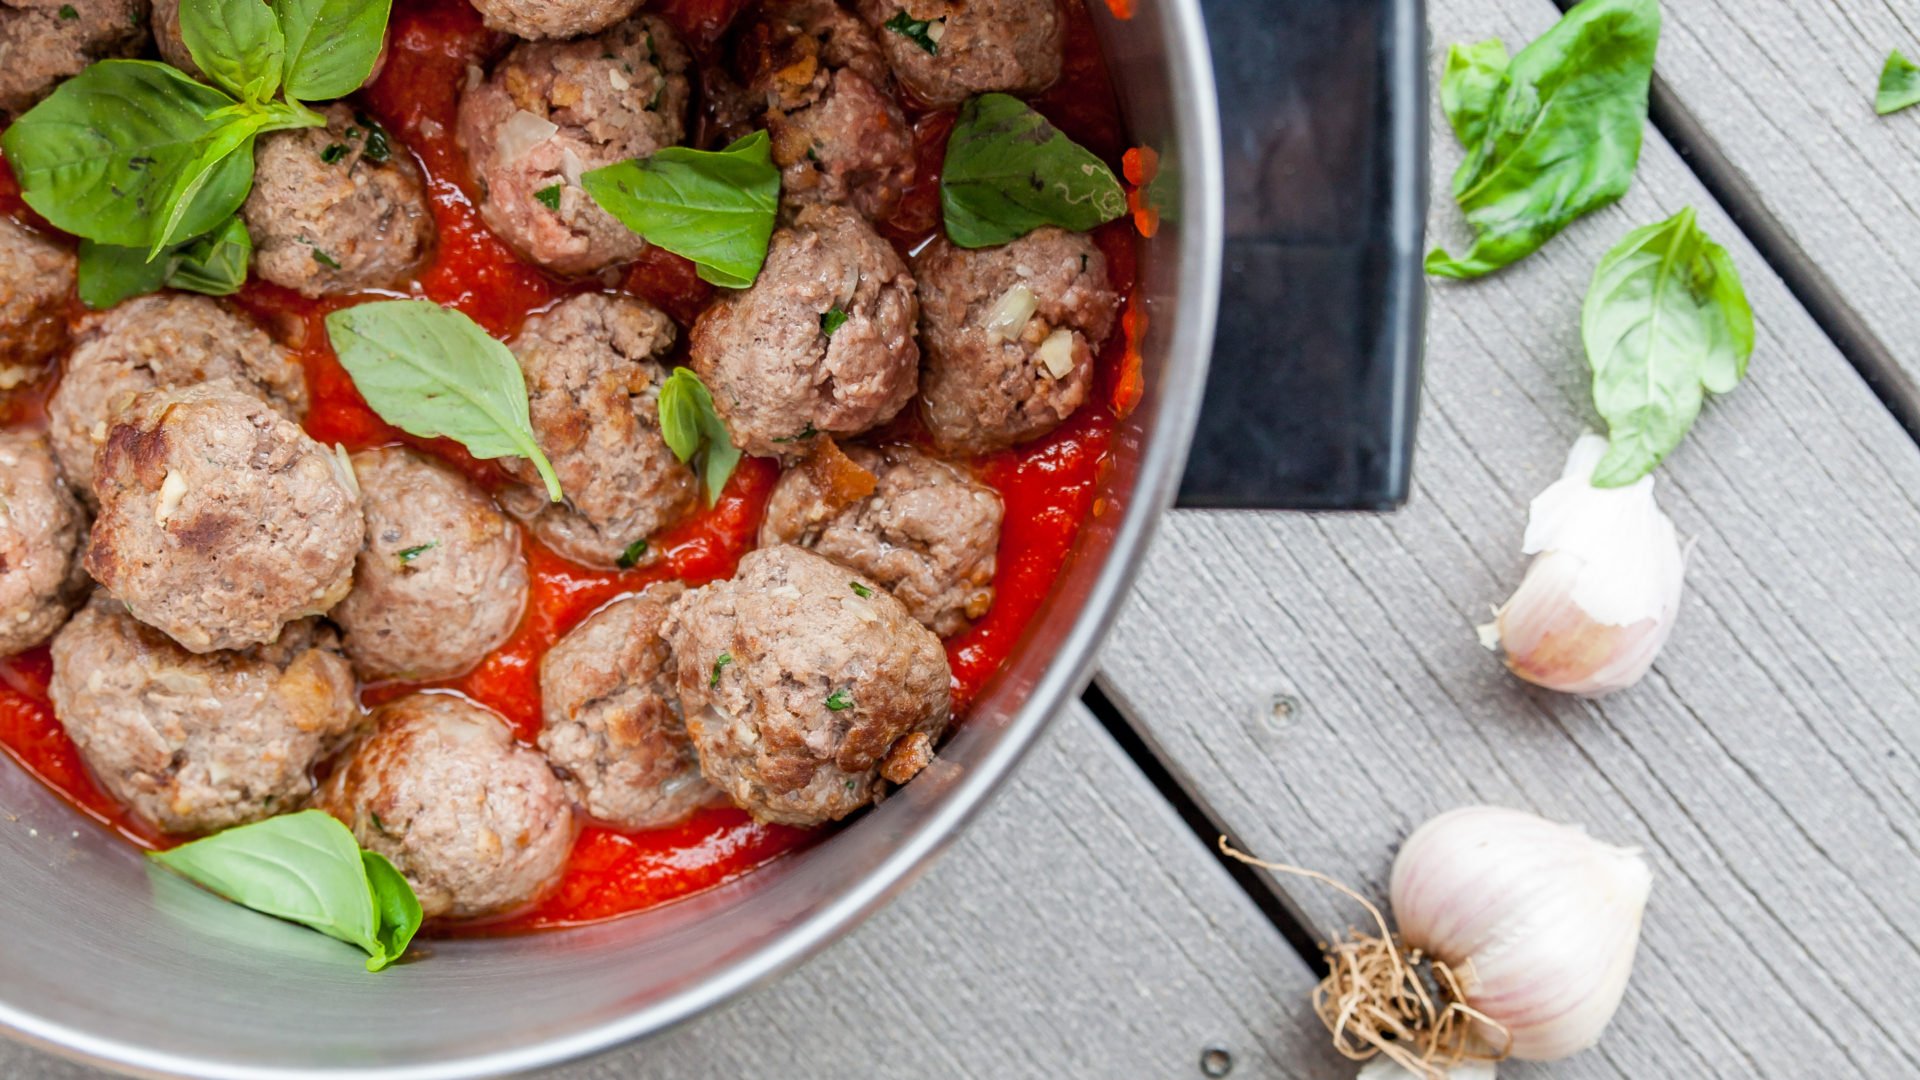 meatballs in a pan, basil leaves and garlic heads beside